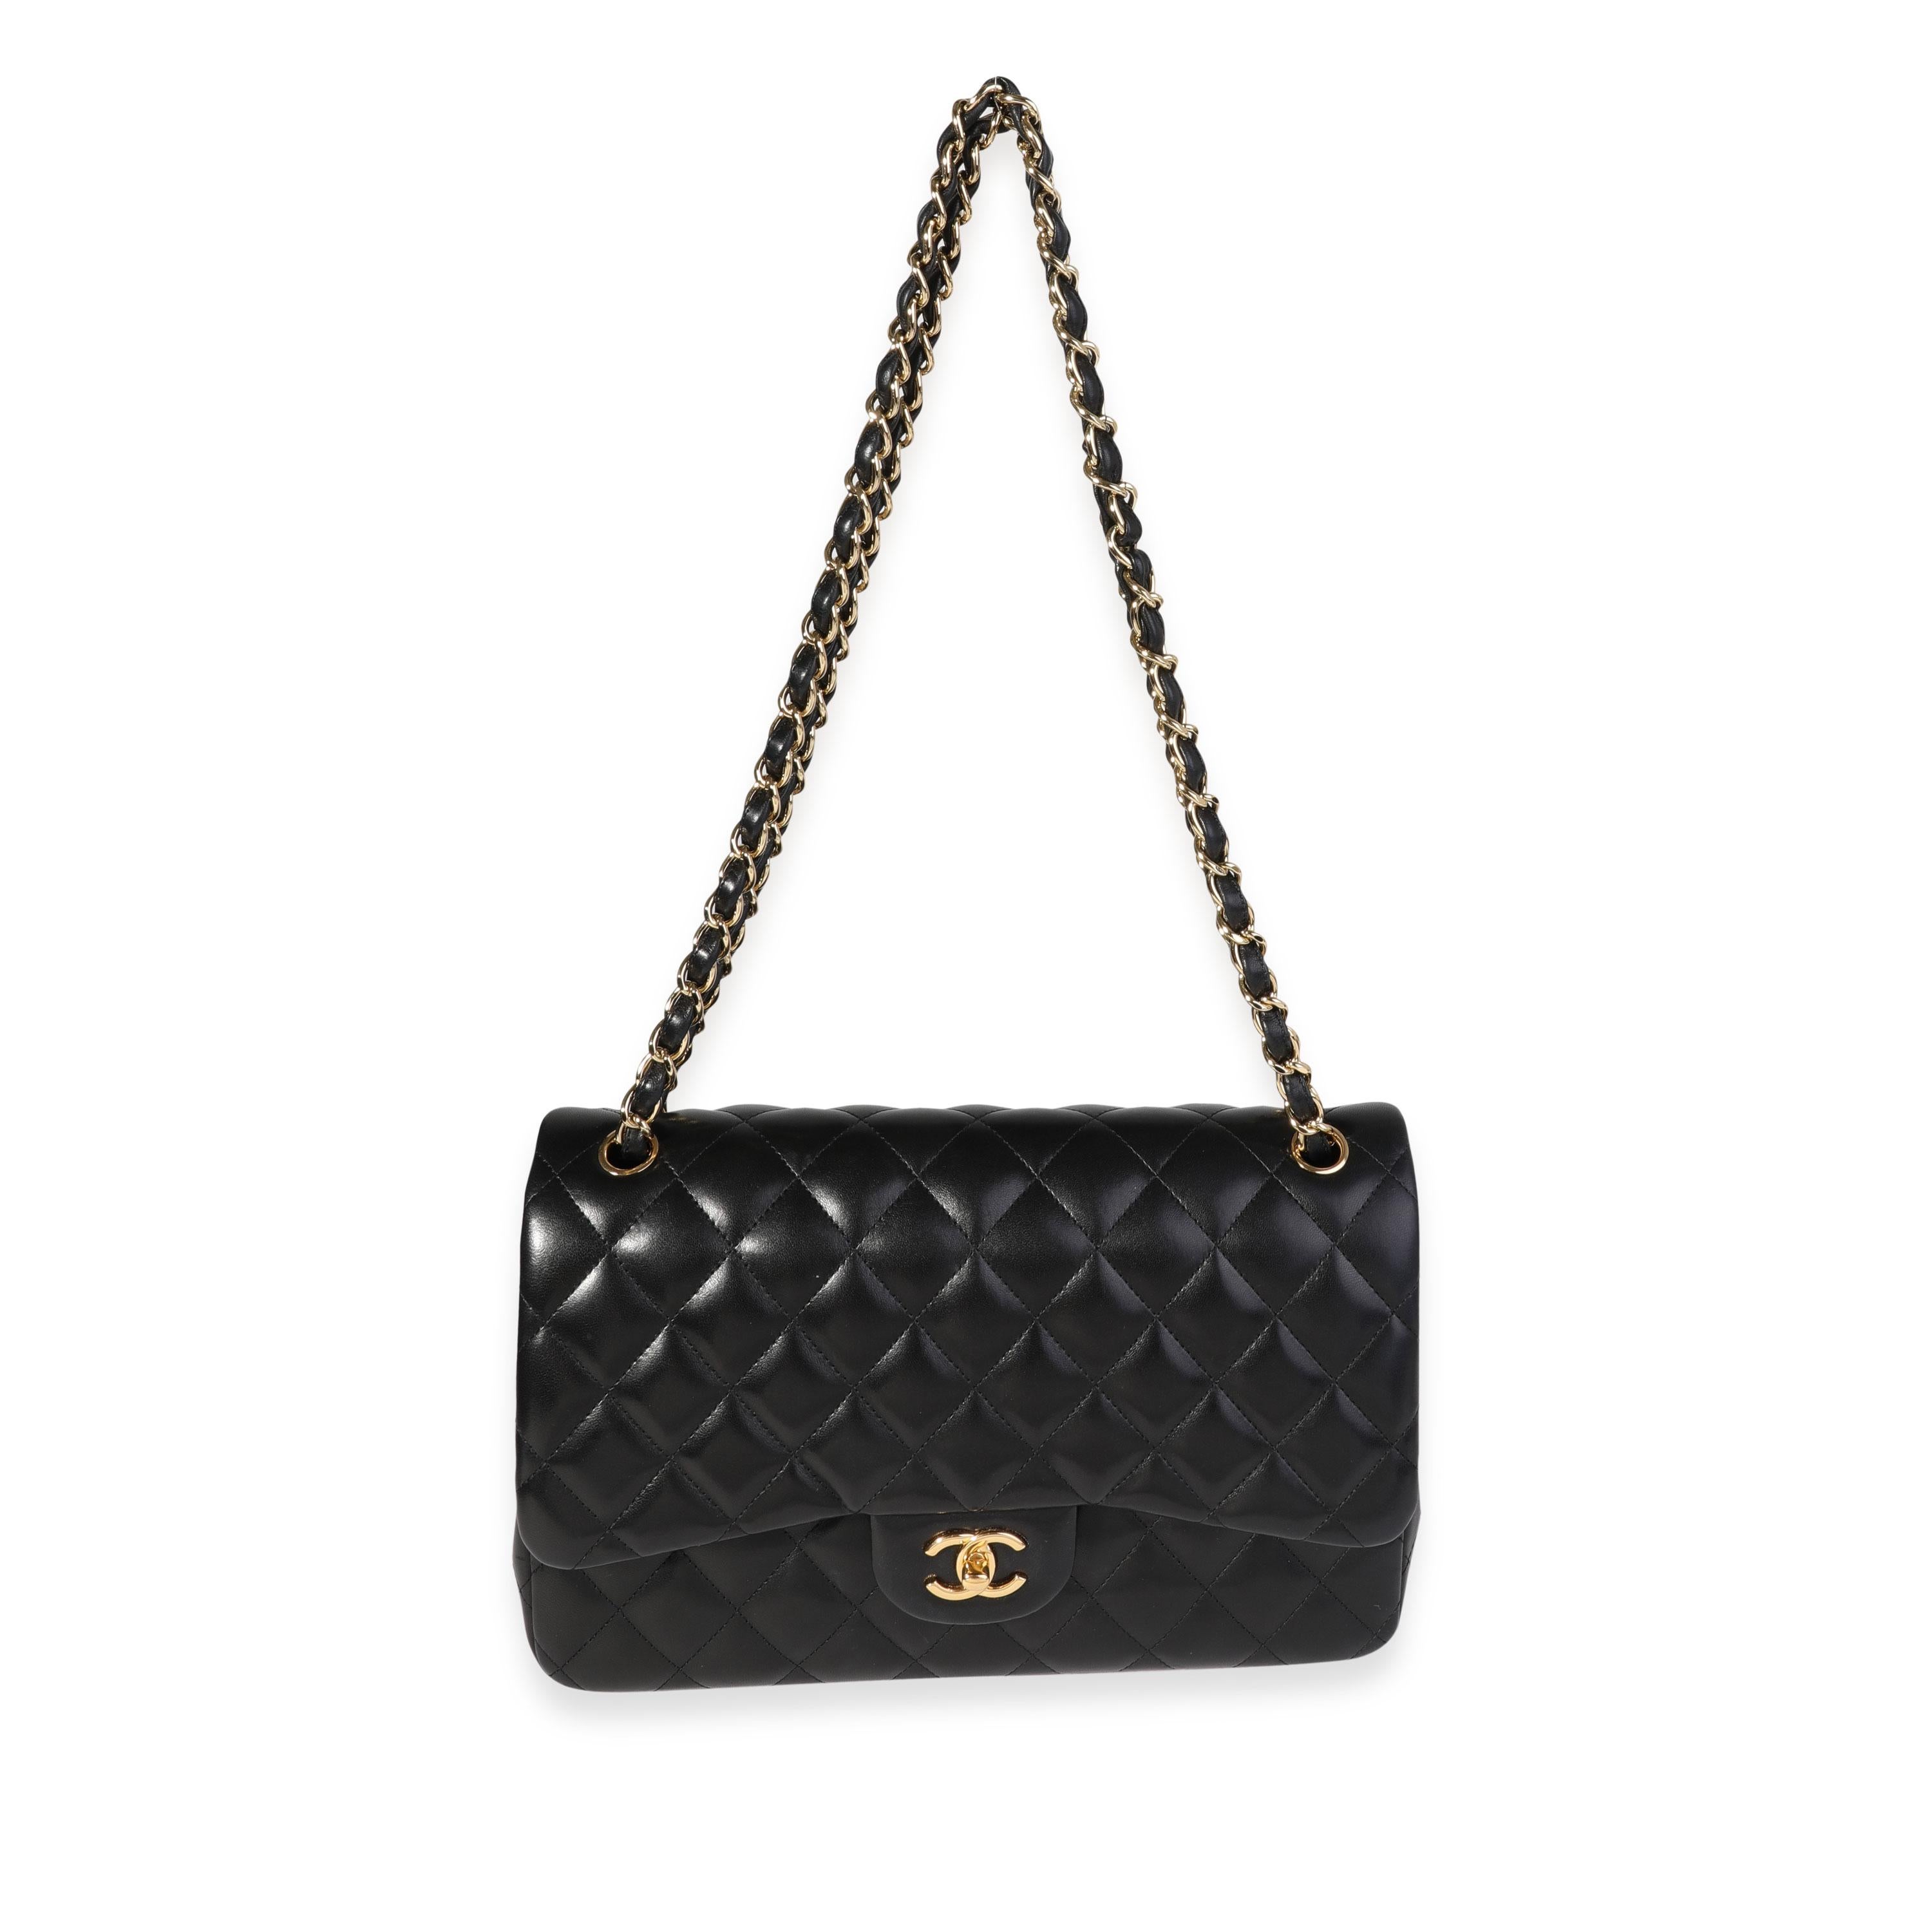 Listing Title: Chanel Black Quilted Lambskin Jumbo Classic Double Flap
SKU: 120359
MSRP: 9500.00
Condition: Pre-owned 
Handbag Condition: Very Good
Condition Comments: Very Good Condition. Scuffing to corners and throughout exterior. Discoloration